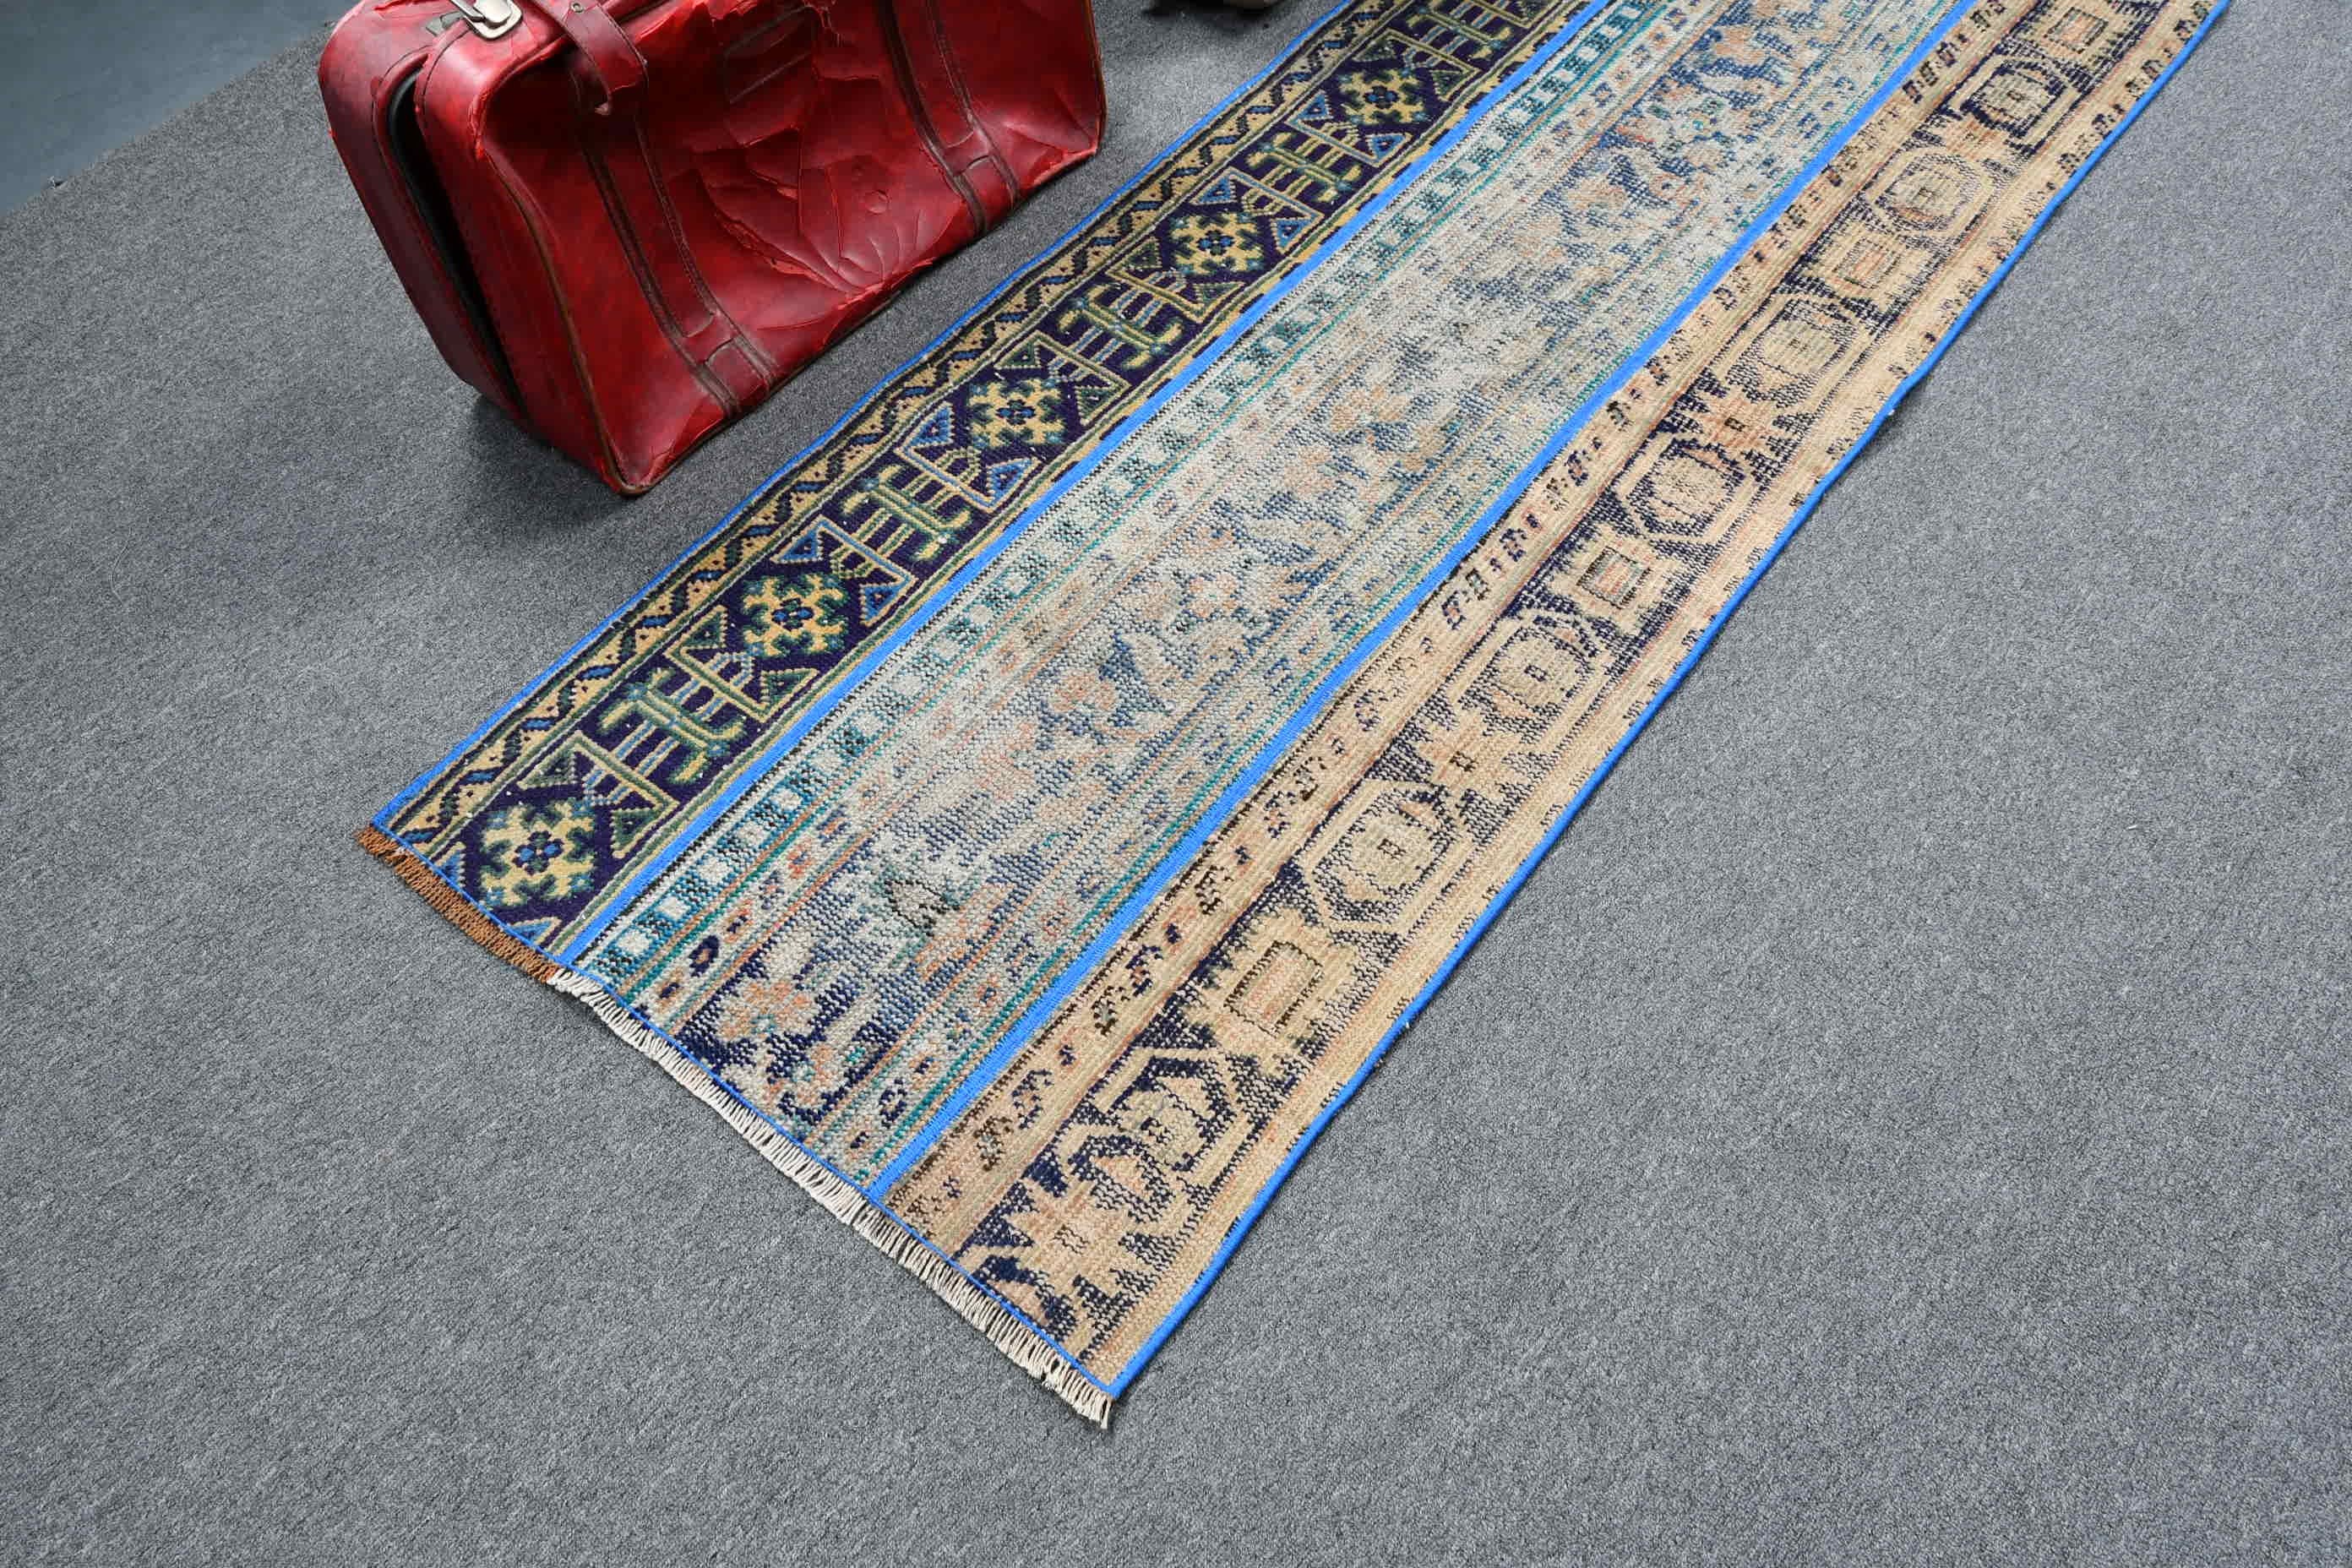 Blue Anatolian Rugs, Old Rug, Kitchen Rugs, 2.4x7.7 ft Runner Rugs, Vintage Rug, Anatolian Rugs, Bedroom Rug, Rugs for Stair, Turkish Rugs